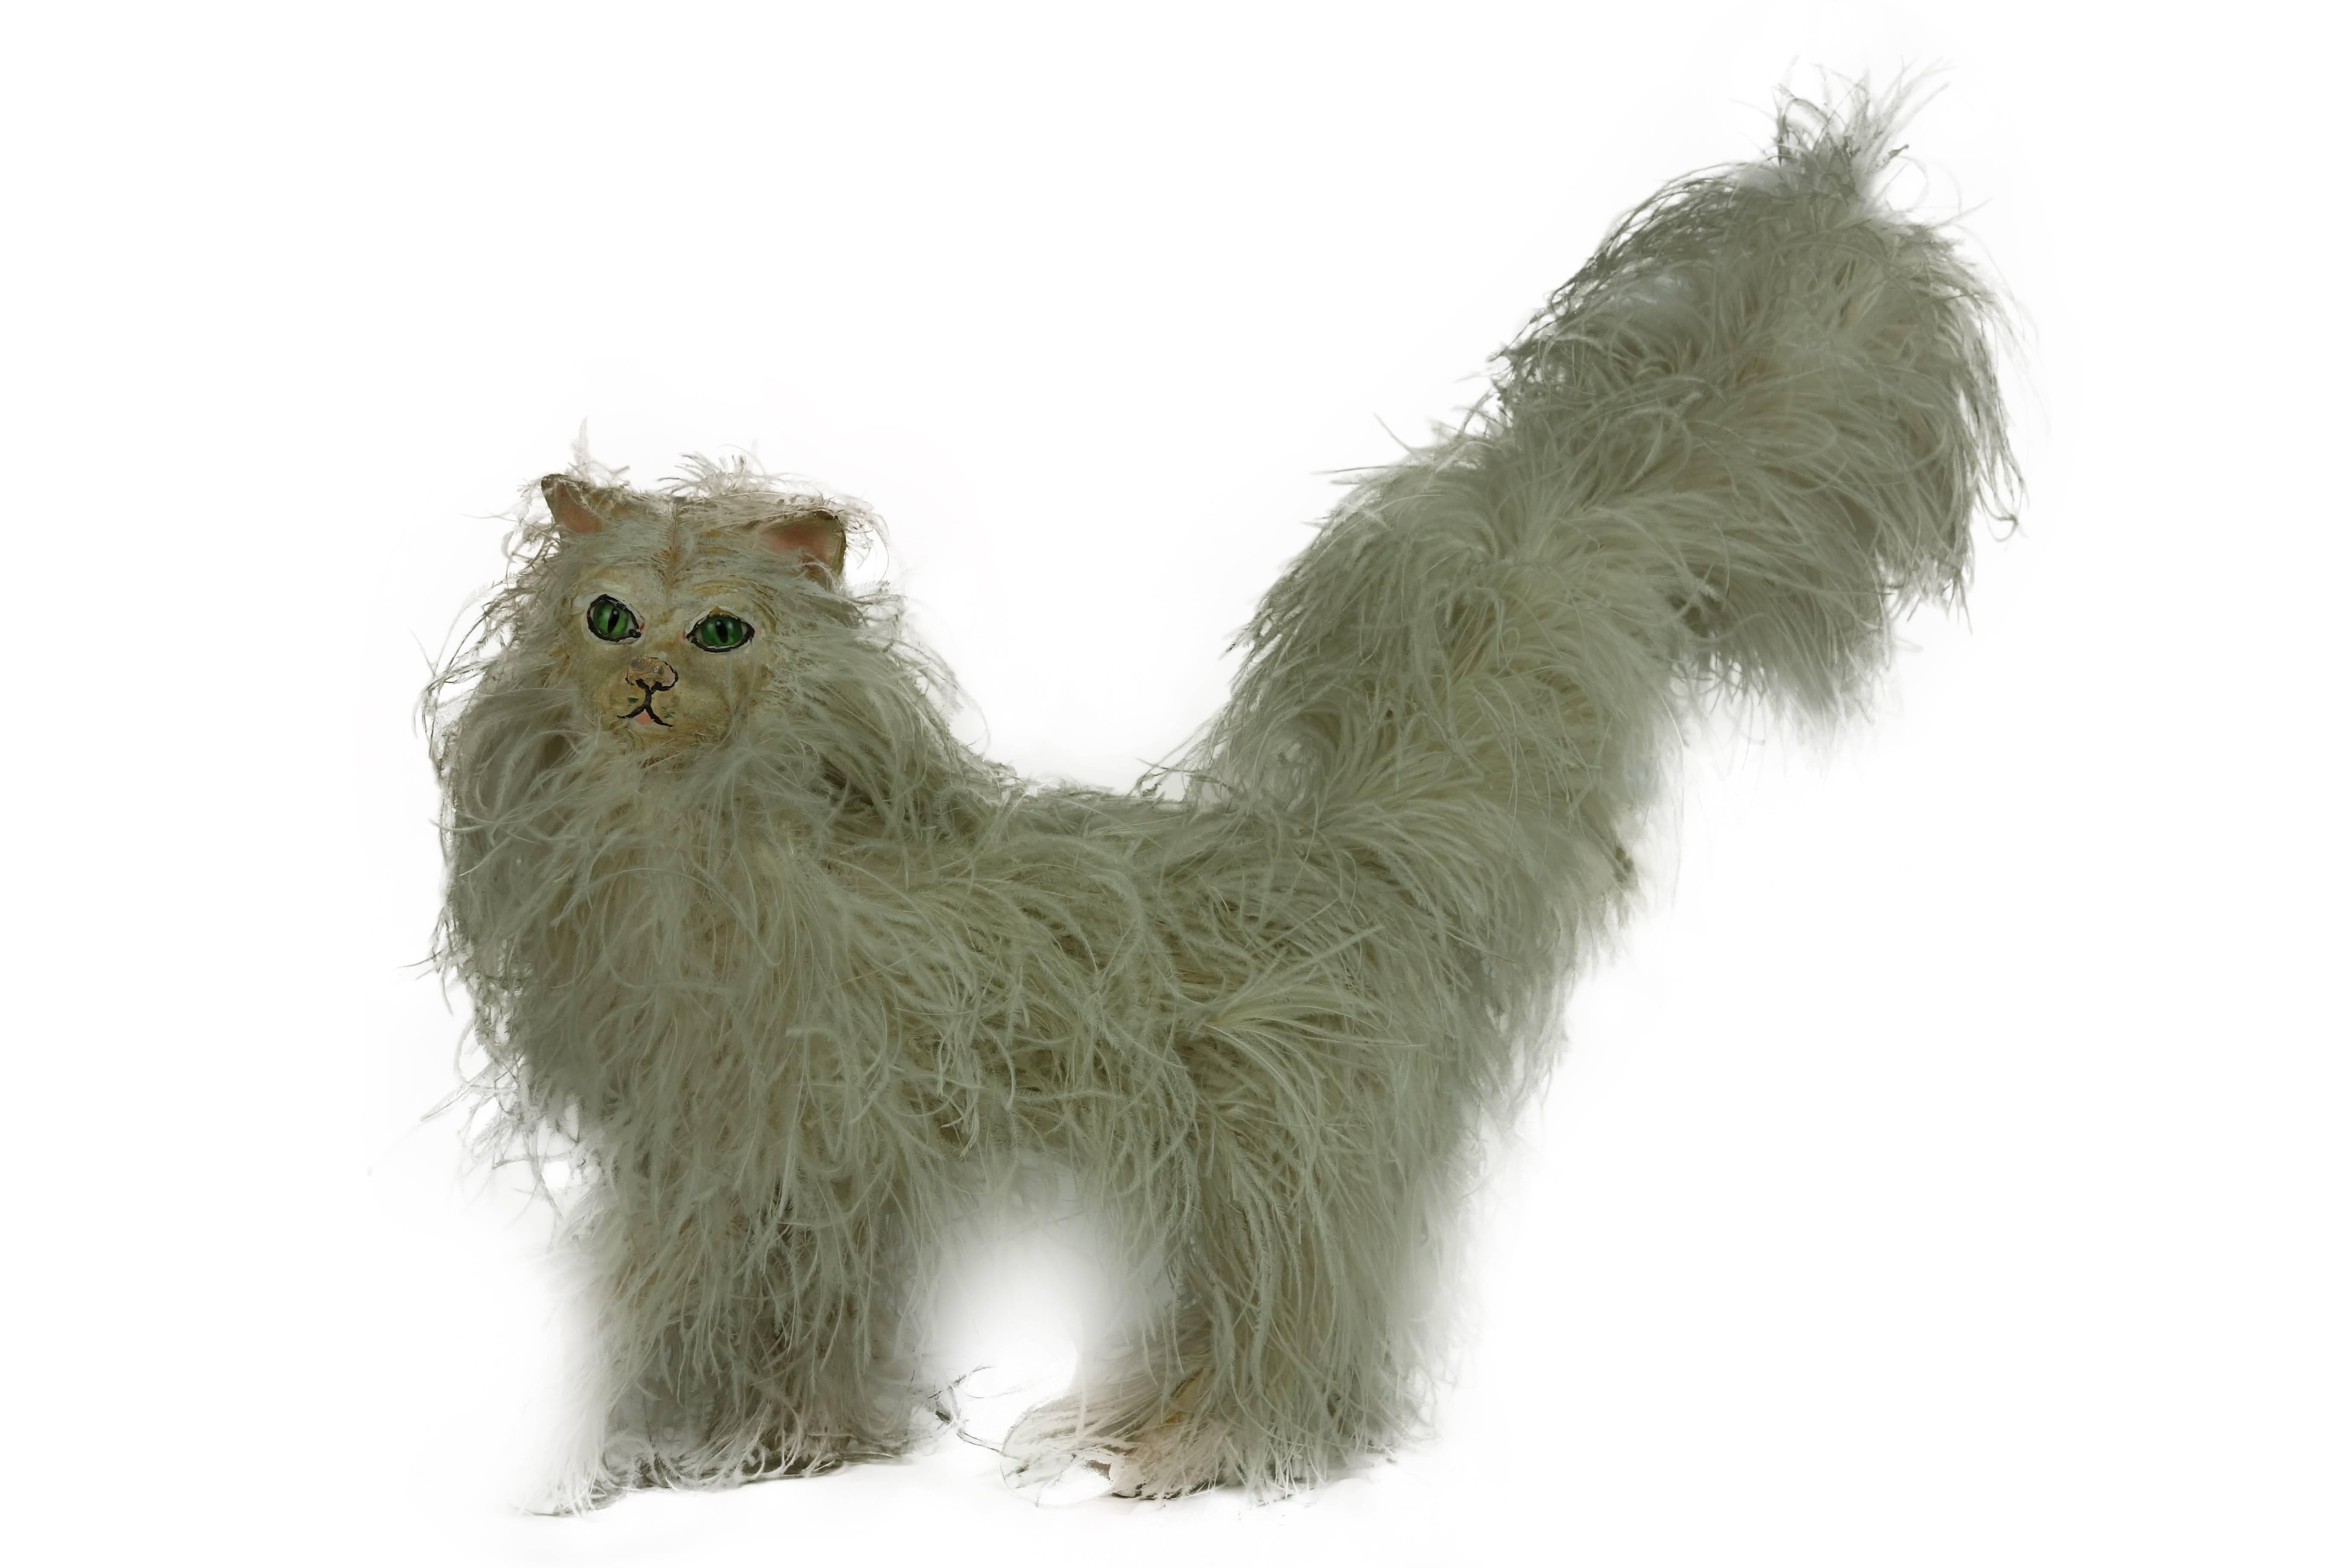 This is an unusual papier mâché cat made of ostrich feathers from a millinery shop in Portland, Oregon, circa 1930. The face is hand-painted with electric green glass eyes. The inside of the body is filled with some material to give it weight.